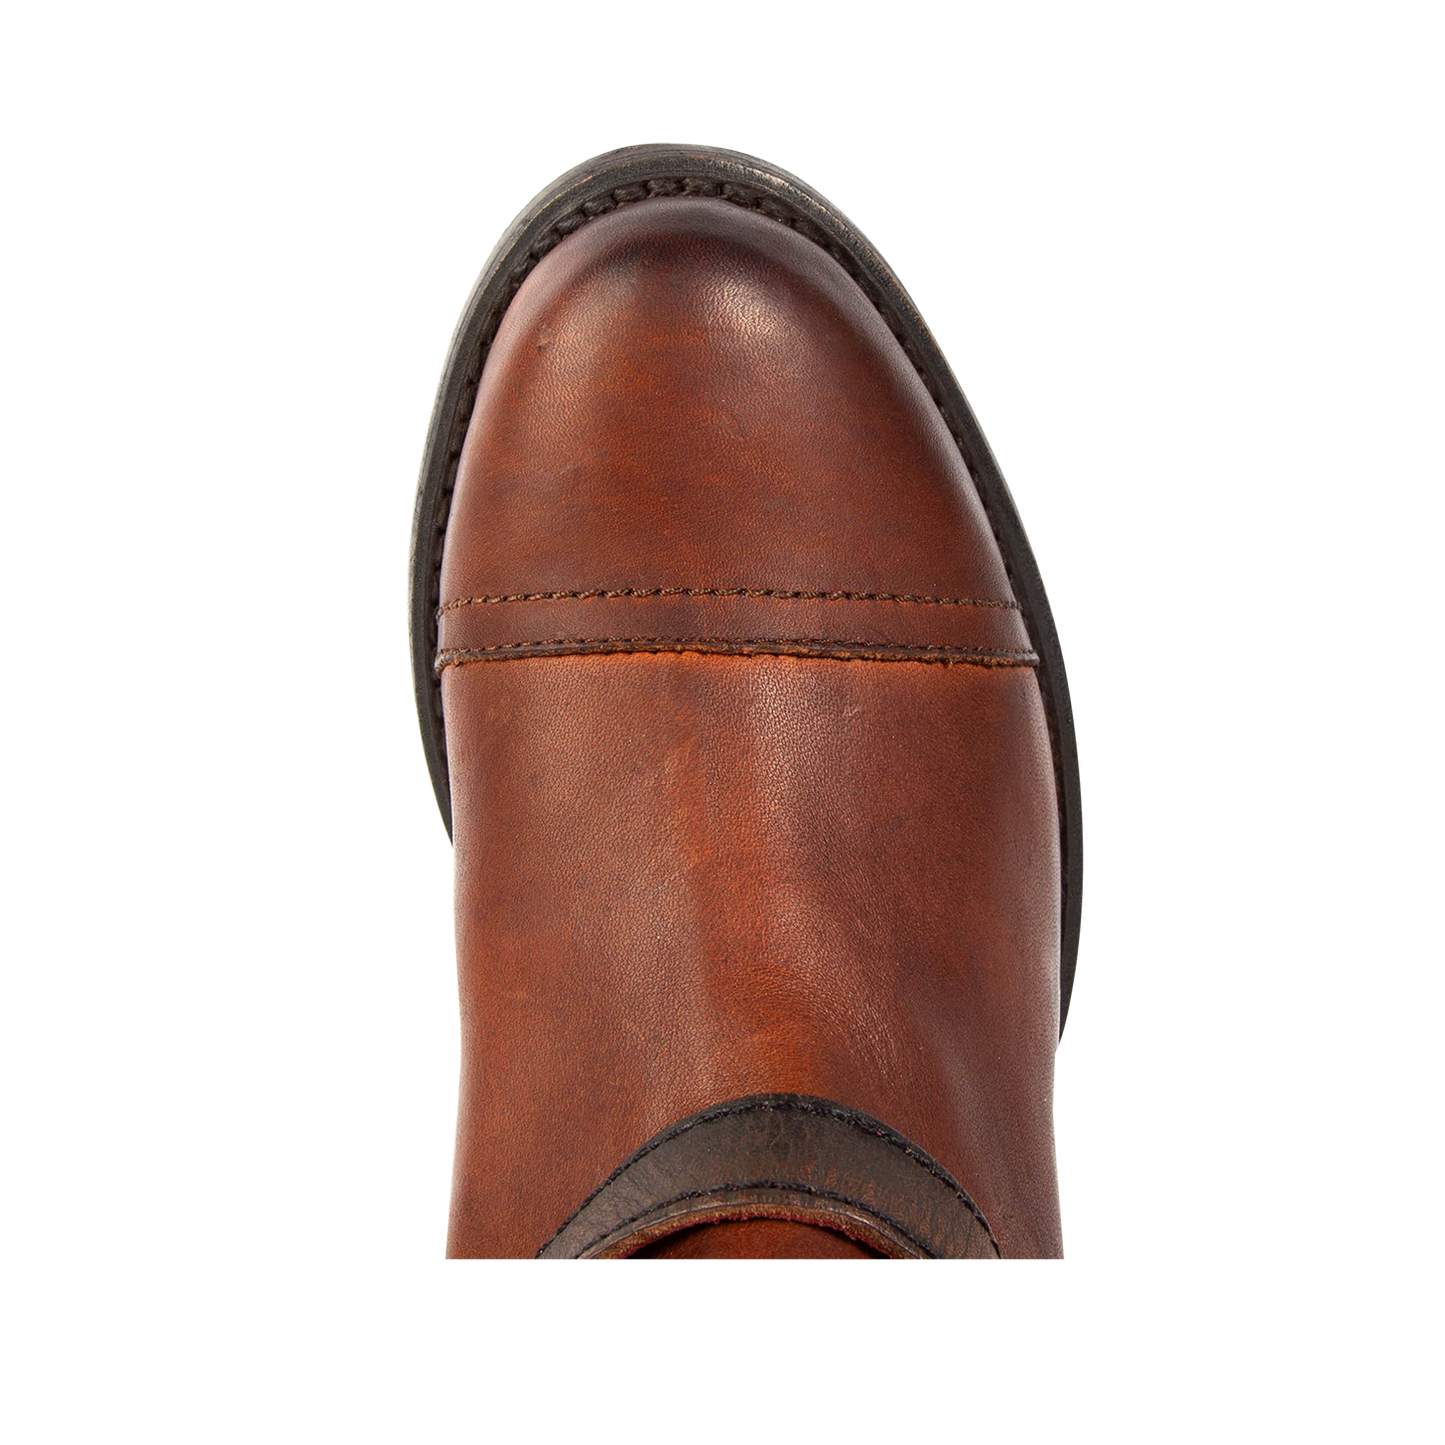 Top view showing almond toe construction with stitch detailing on FREEBIRD women's Roadey cognac tall leather boot